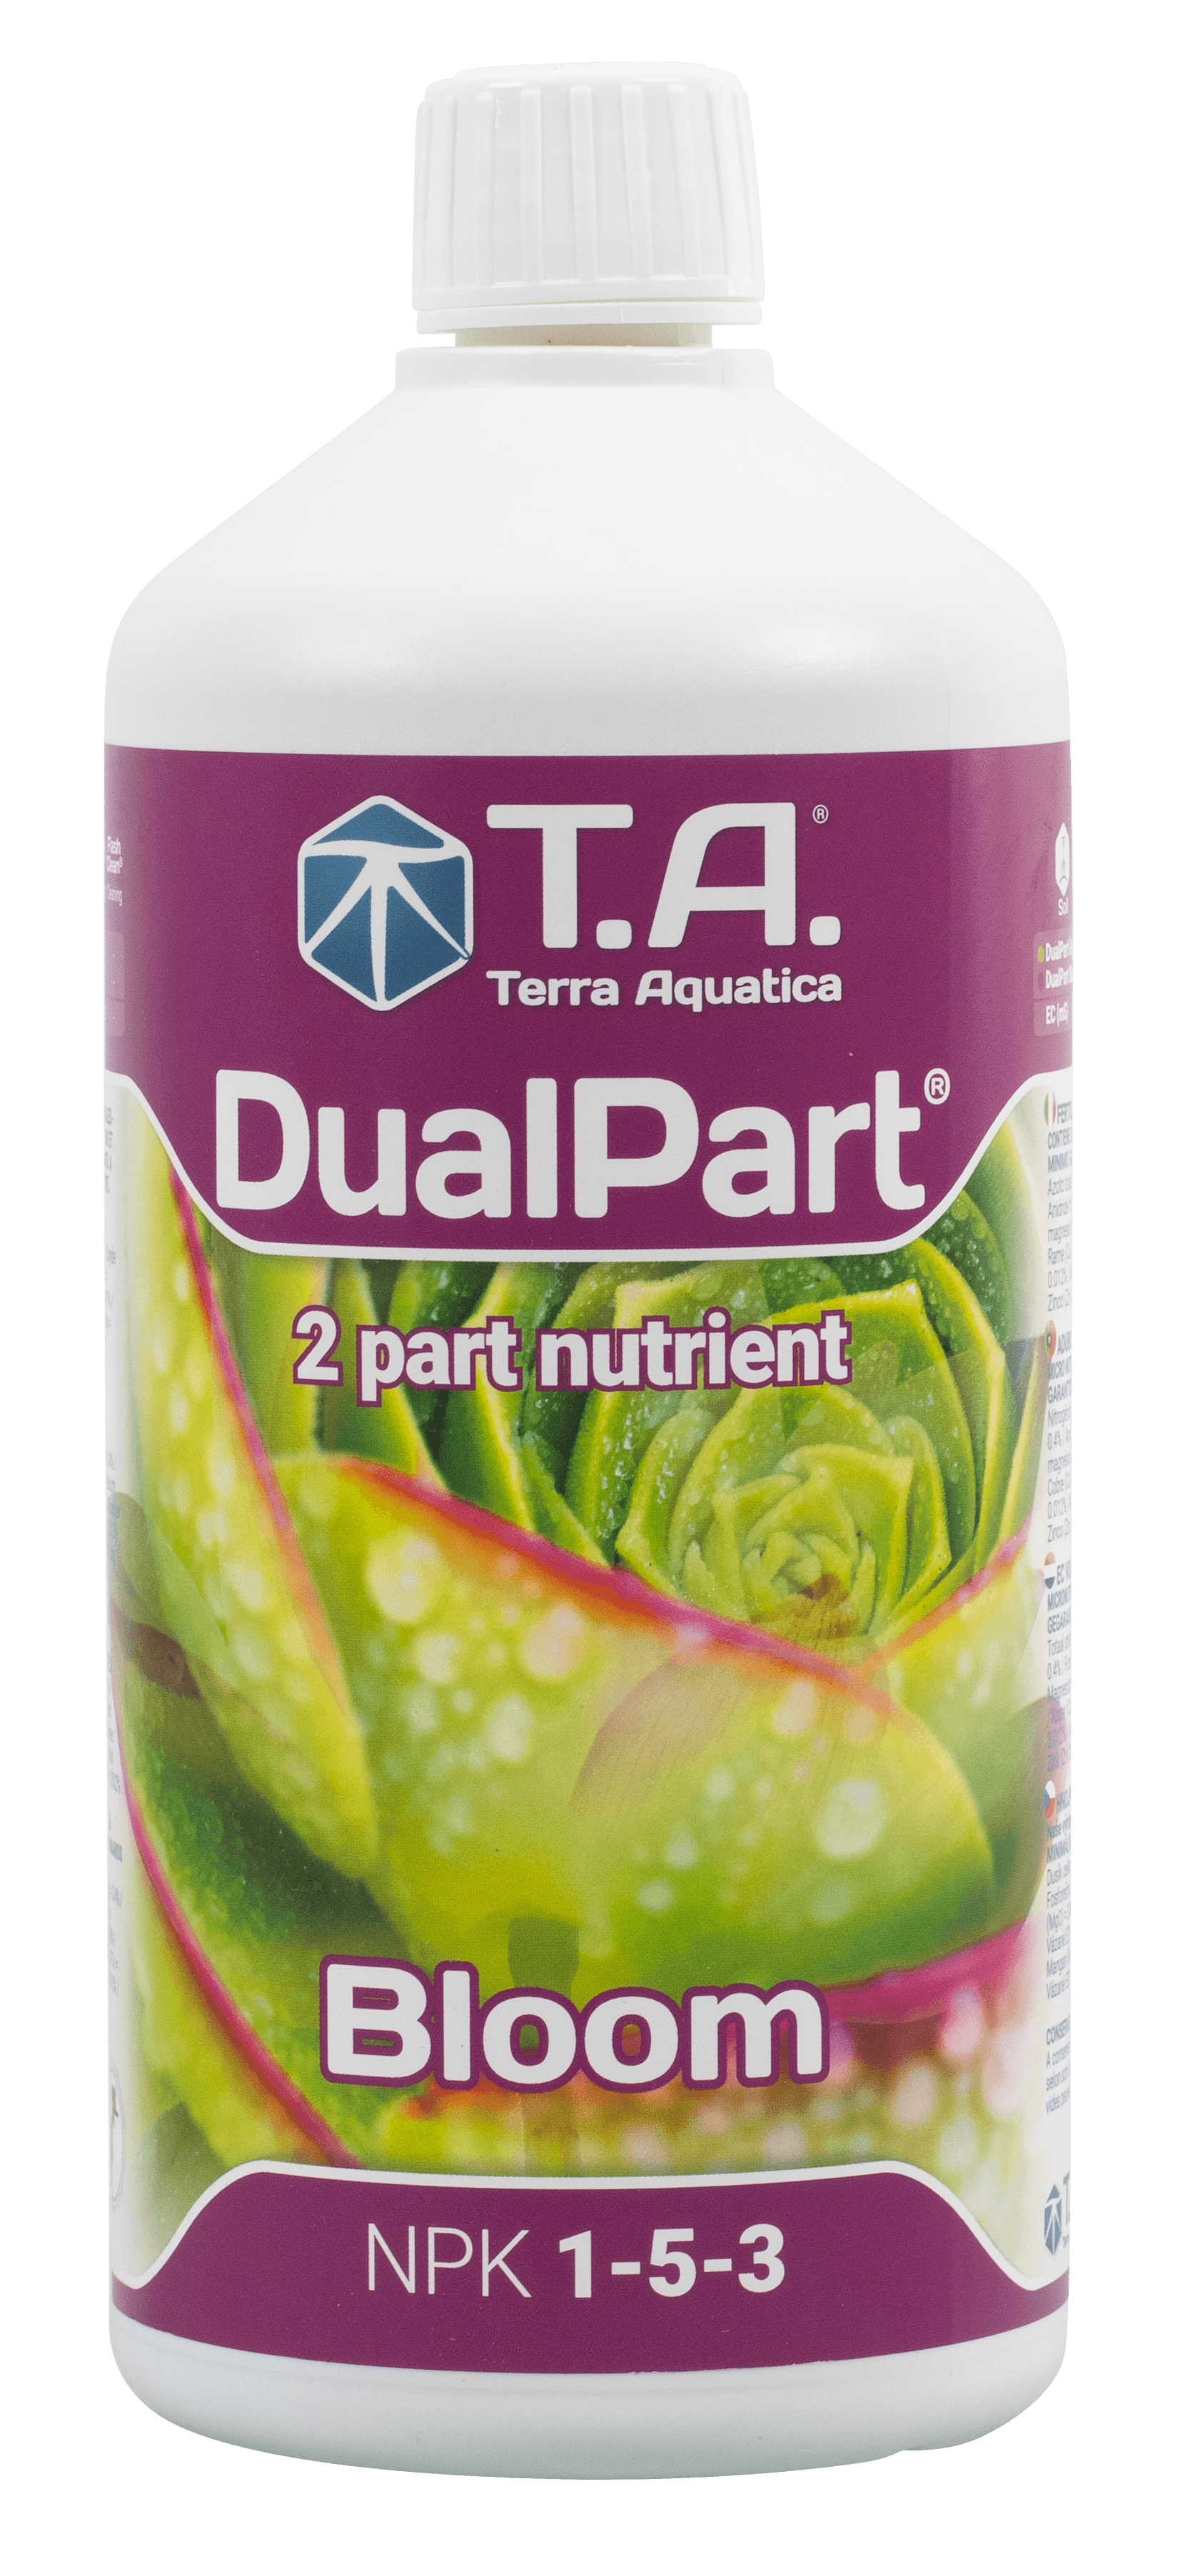 T. A. DualPart Bloom